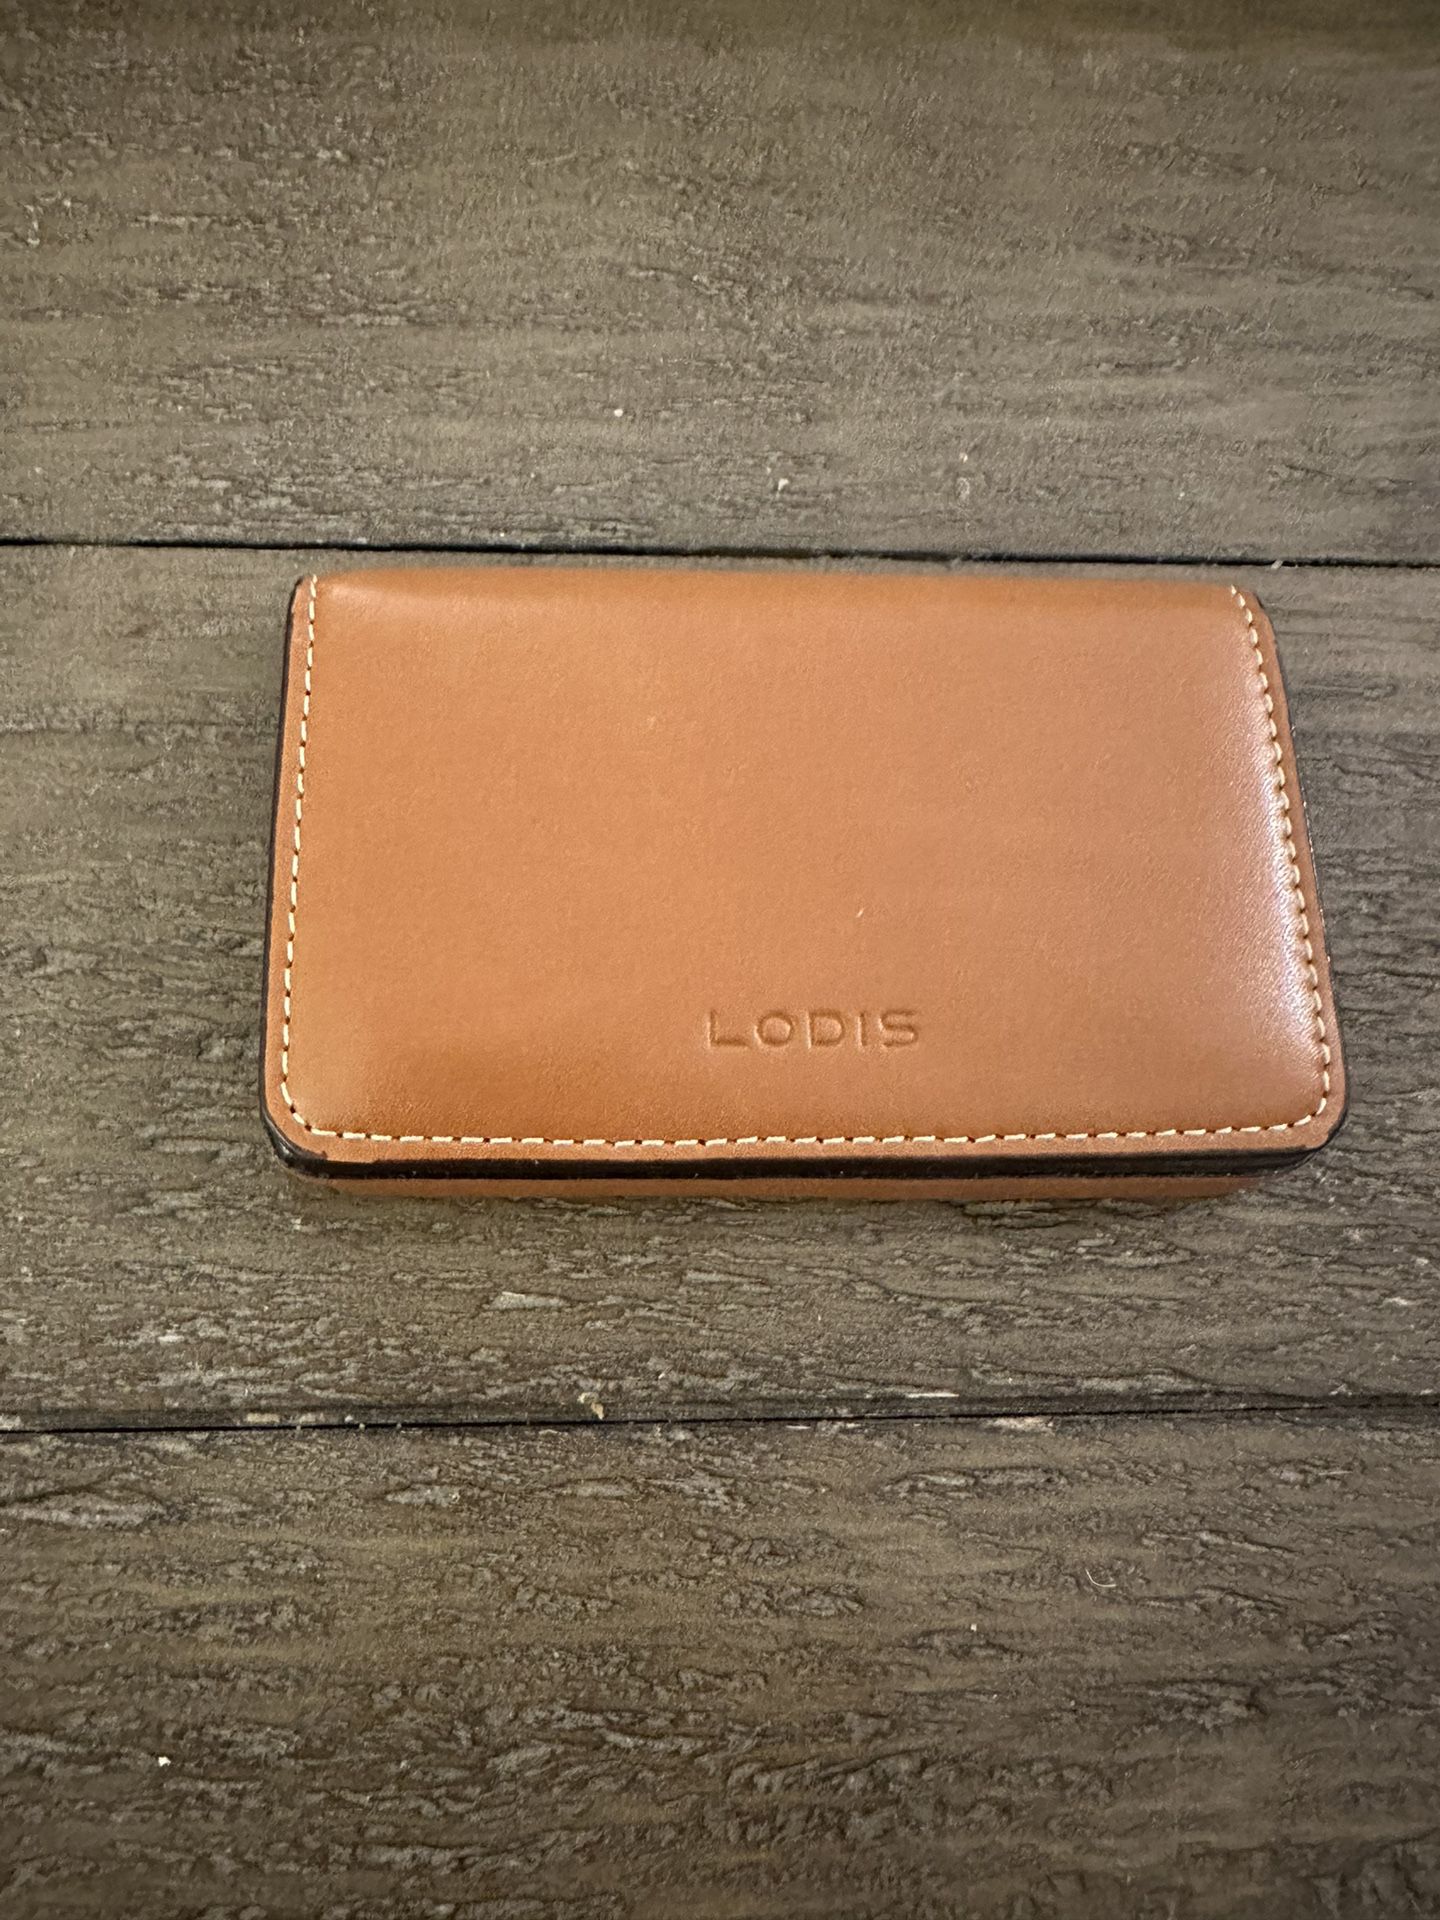 Brand New Lodis  Card Case Wallet